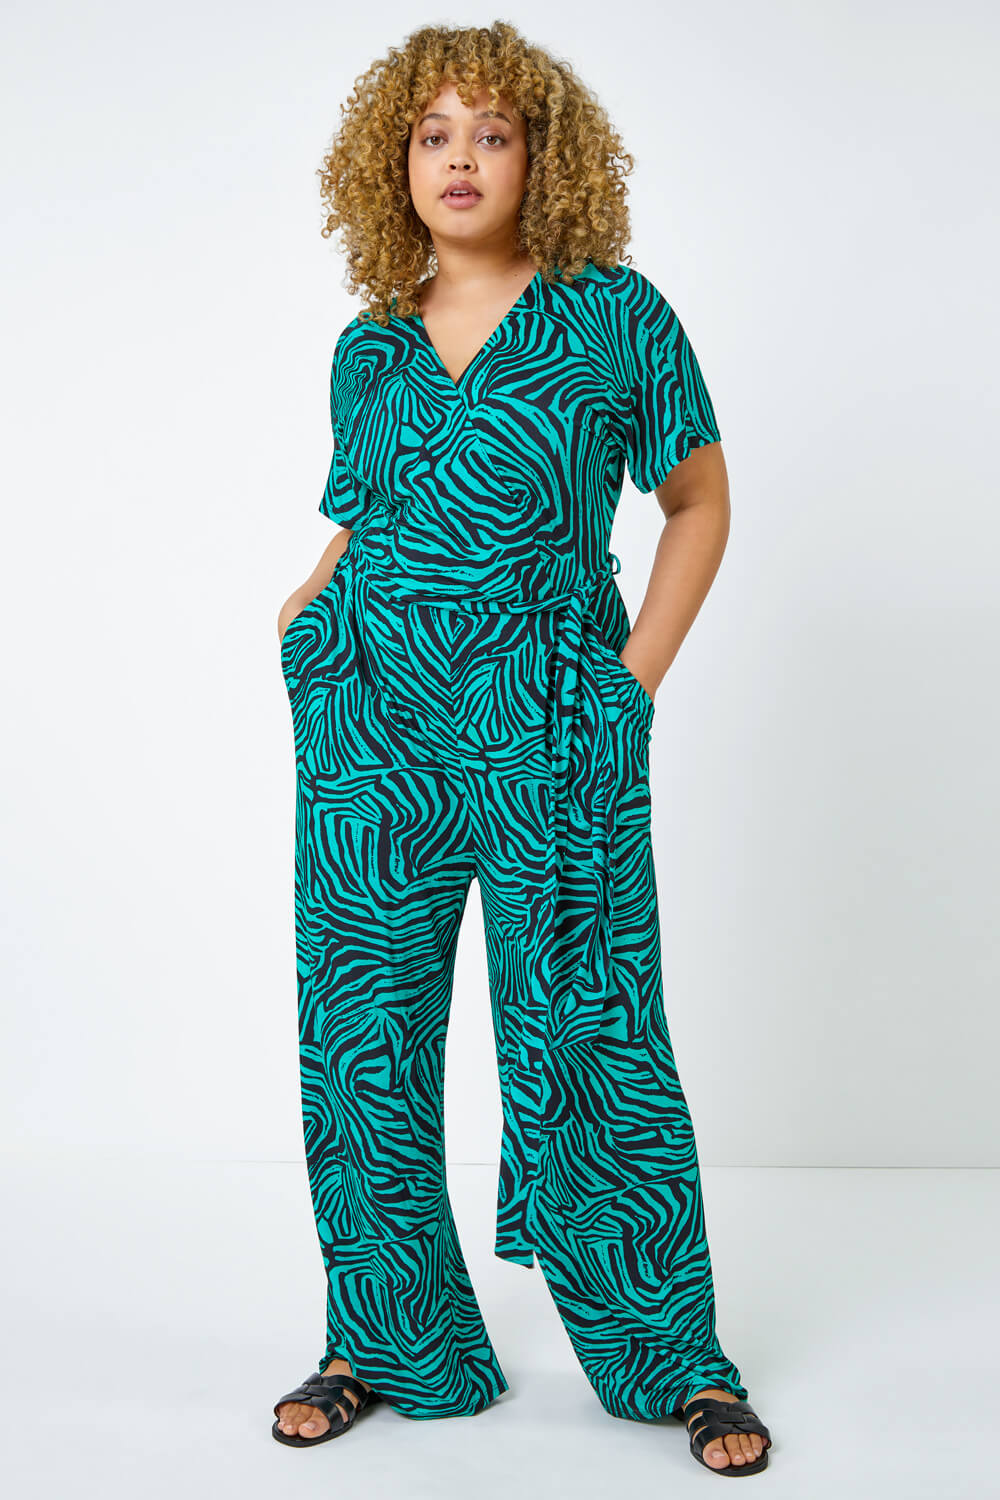 Green Curve Animal Print Stretch Jumpsuit, Image 2 of 5